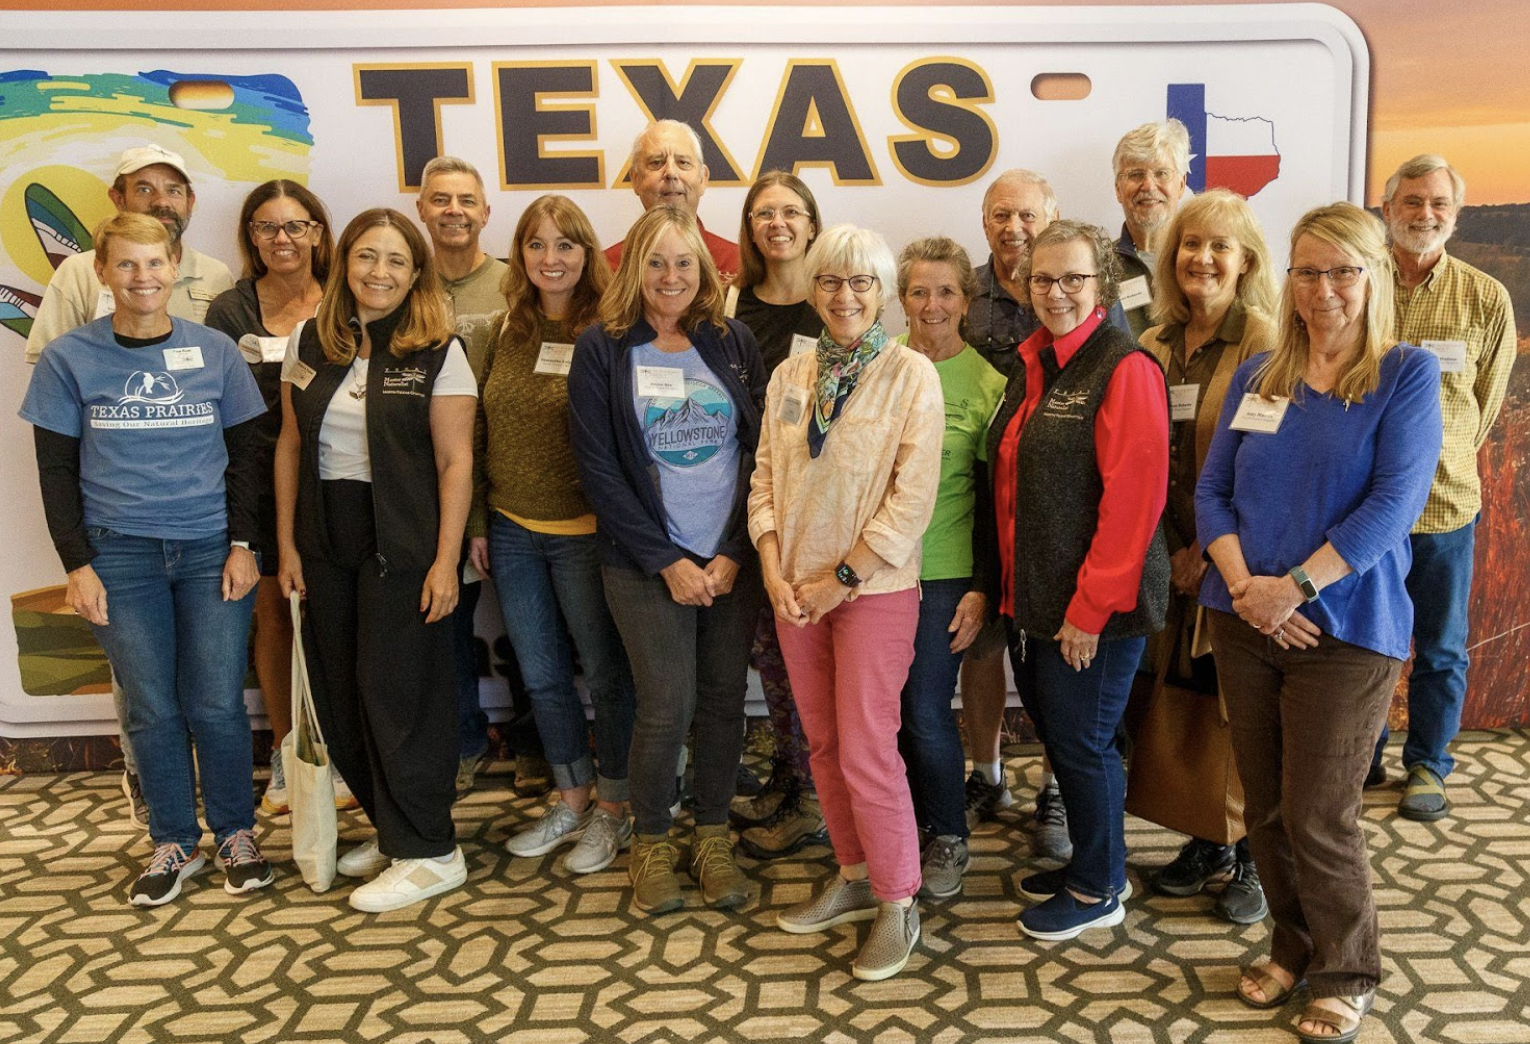 members of the chapter pose in front of a giant Texas license plate at the Annual Conference